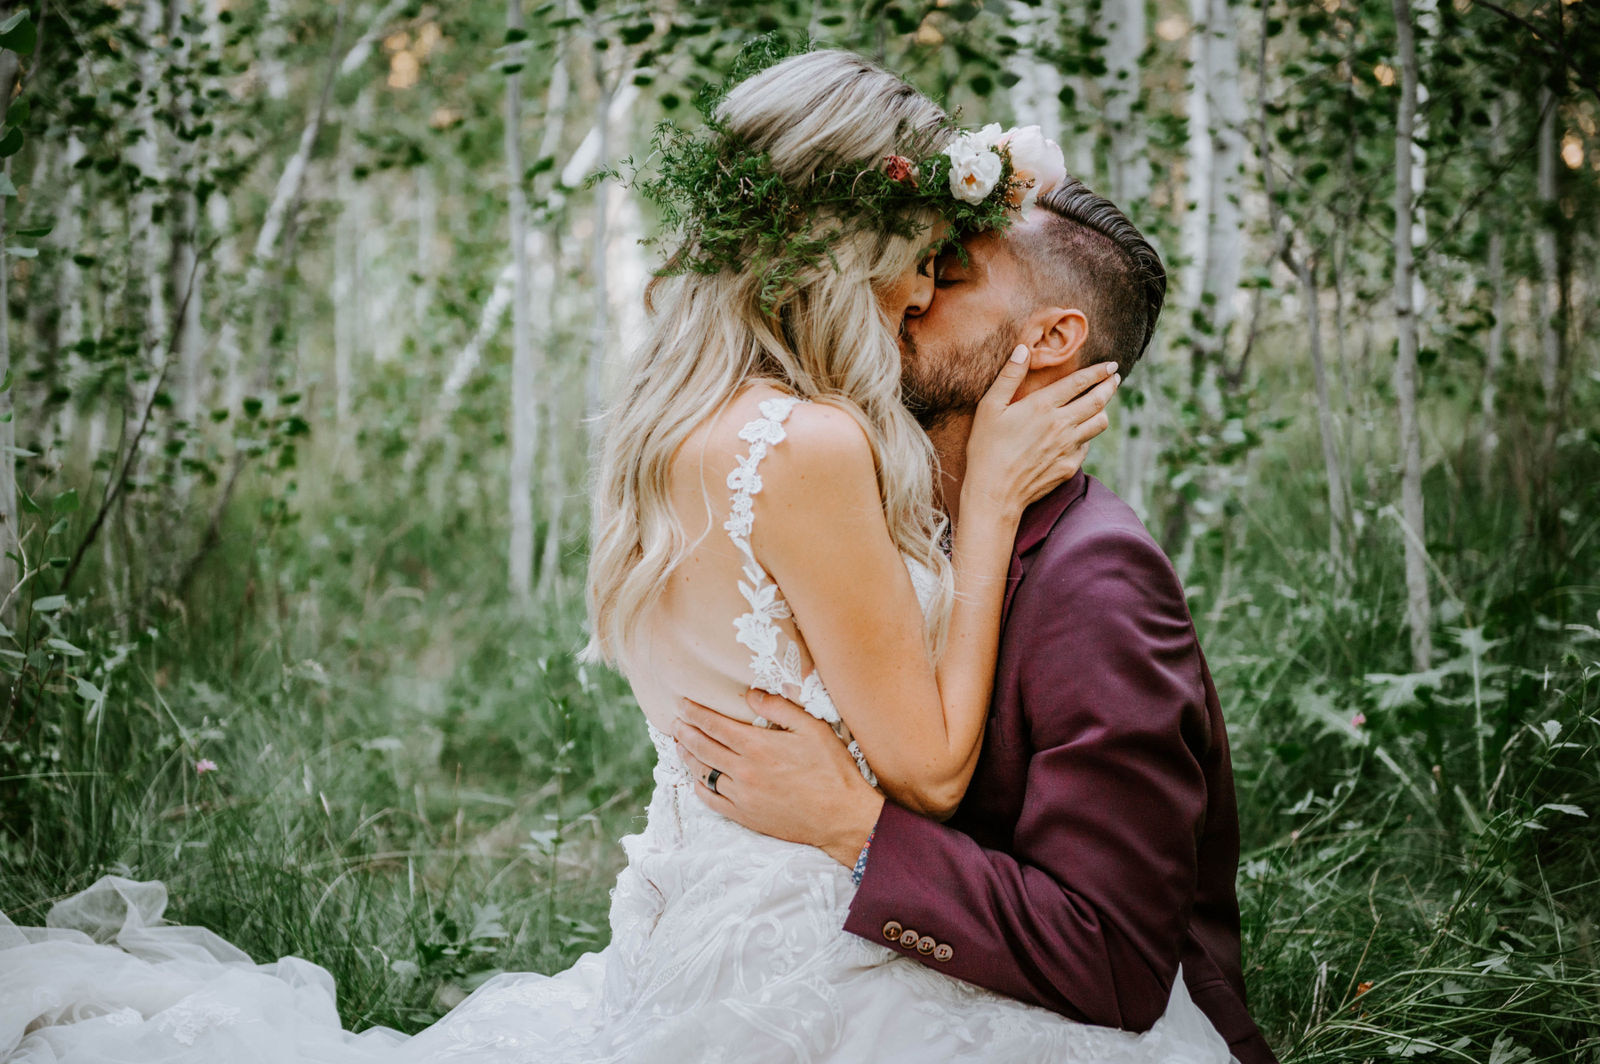 Bride straddling and kissing the groom in a grove of aspen trees at shevlin park, across from aspen hall